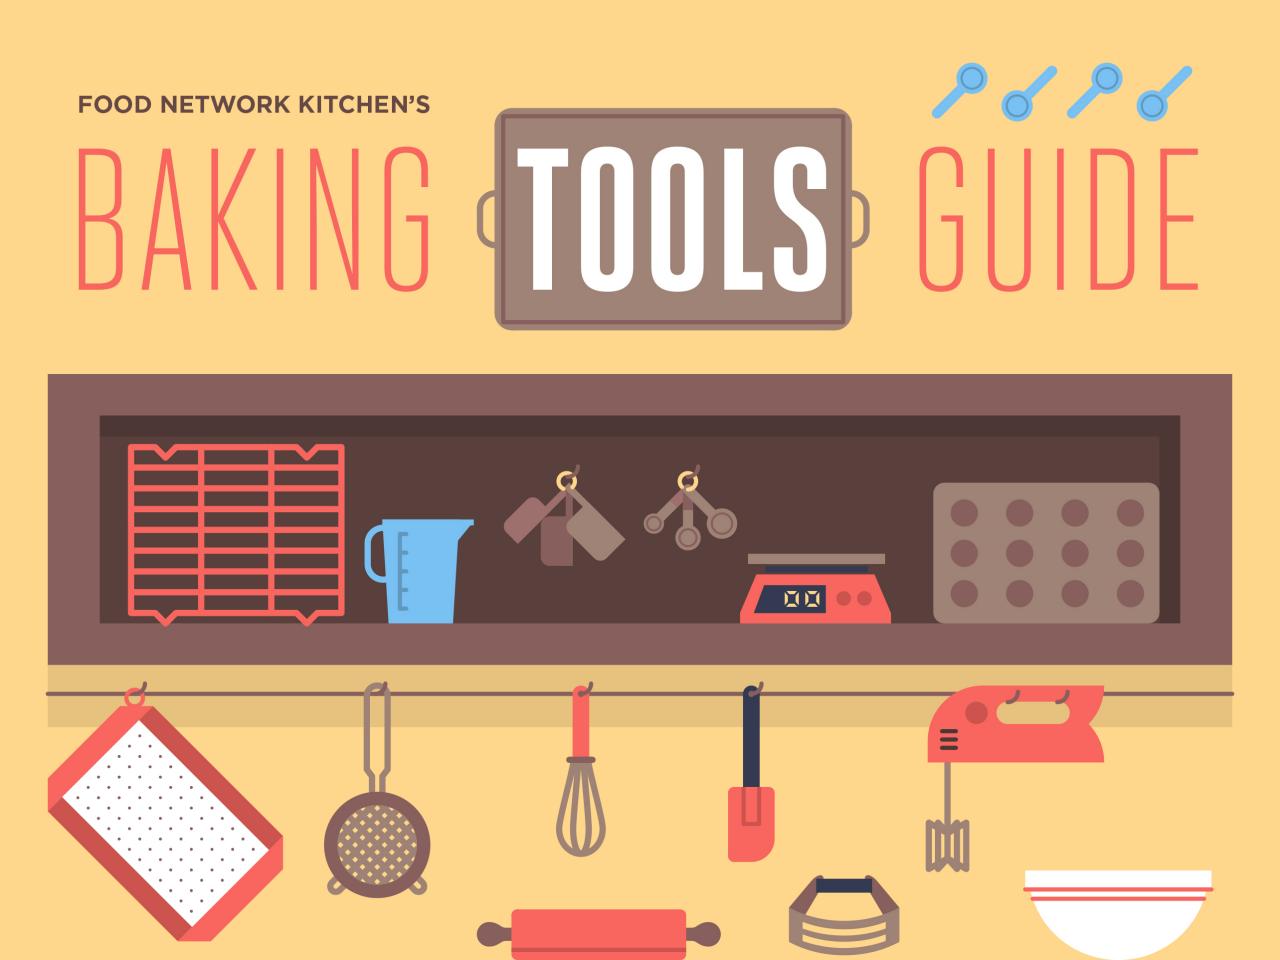 Baking TOOLS And equipment